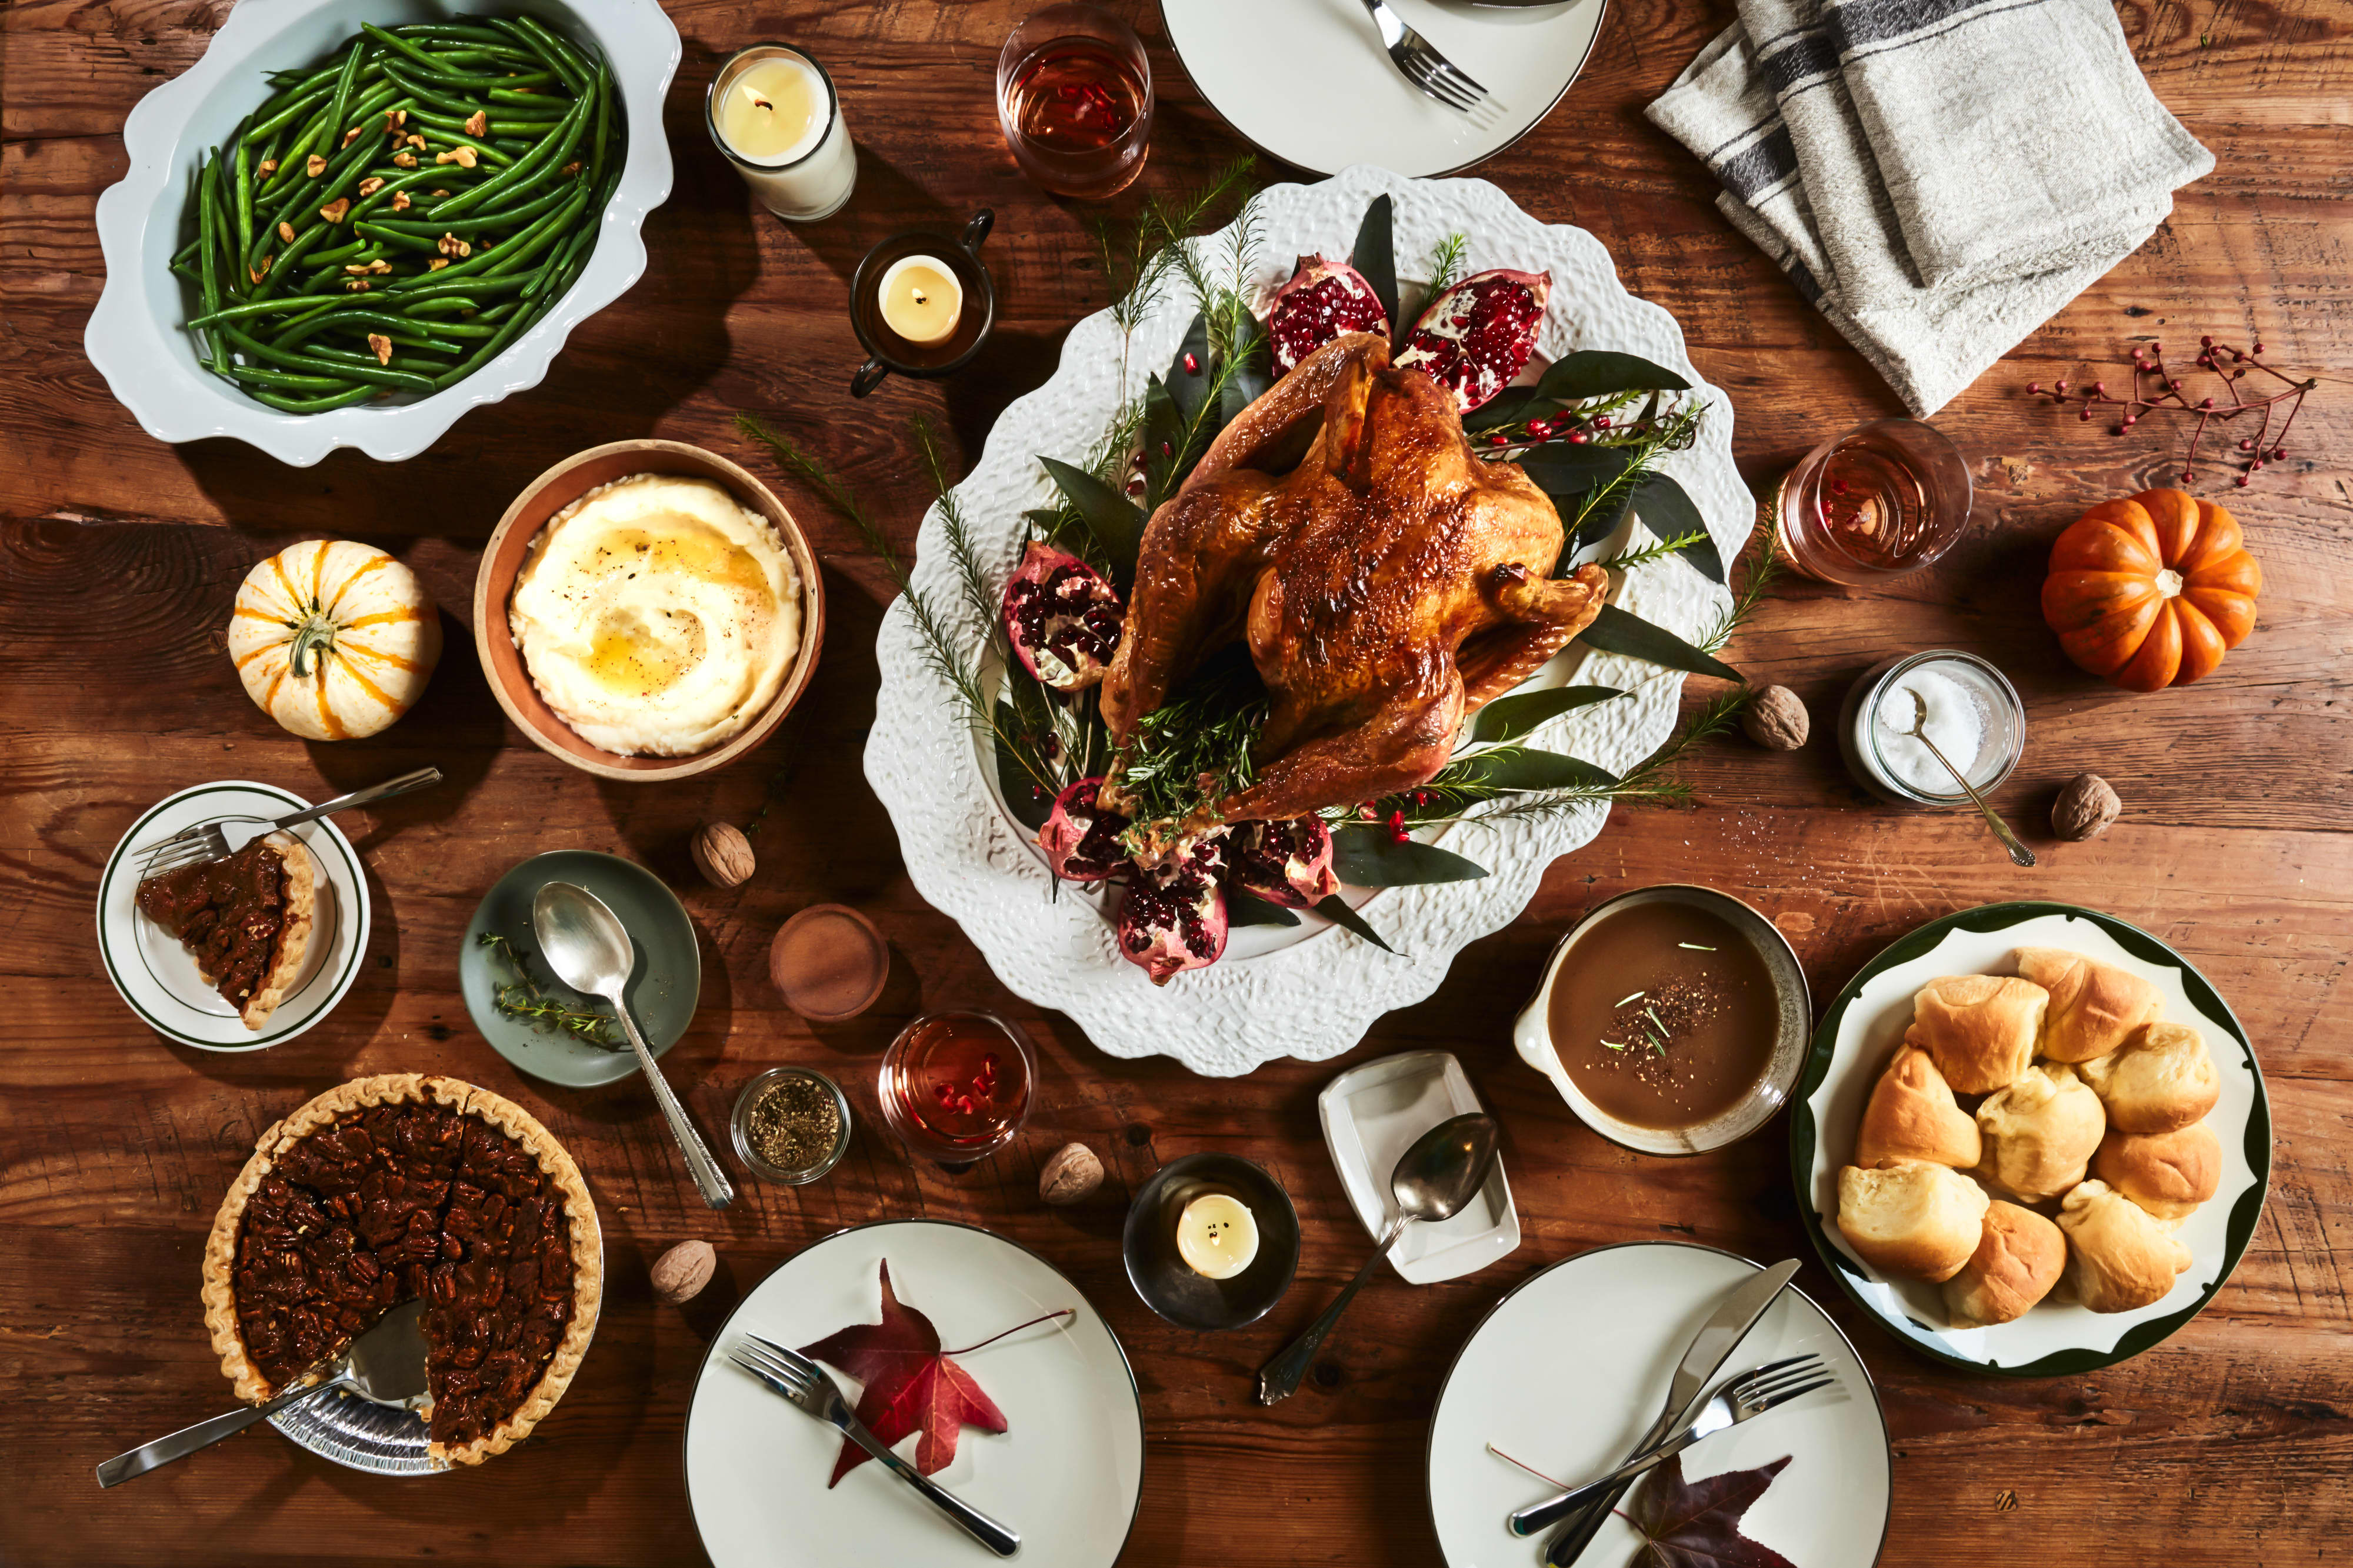 https://cdn.apartmenttherapy.info/image/upload/v1604960182/k/Photo/In-House%20Stock/Thanksgiving/Kitchn_Holiday_Table-2.jpg